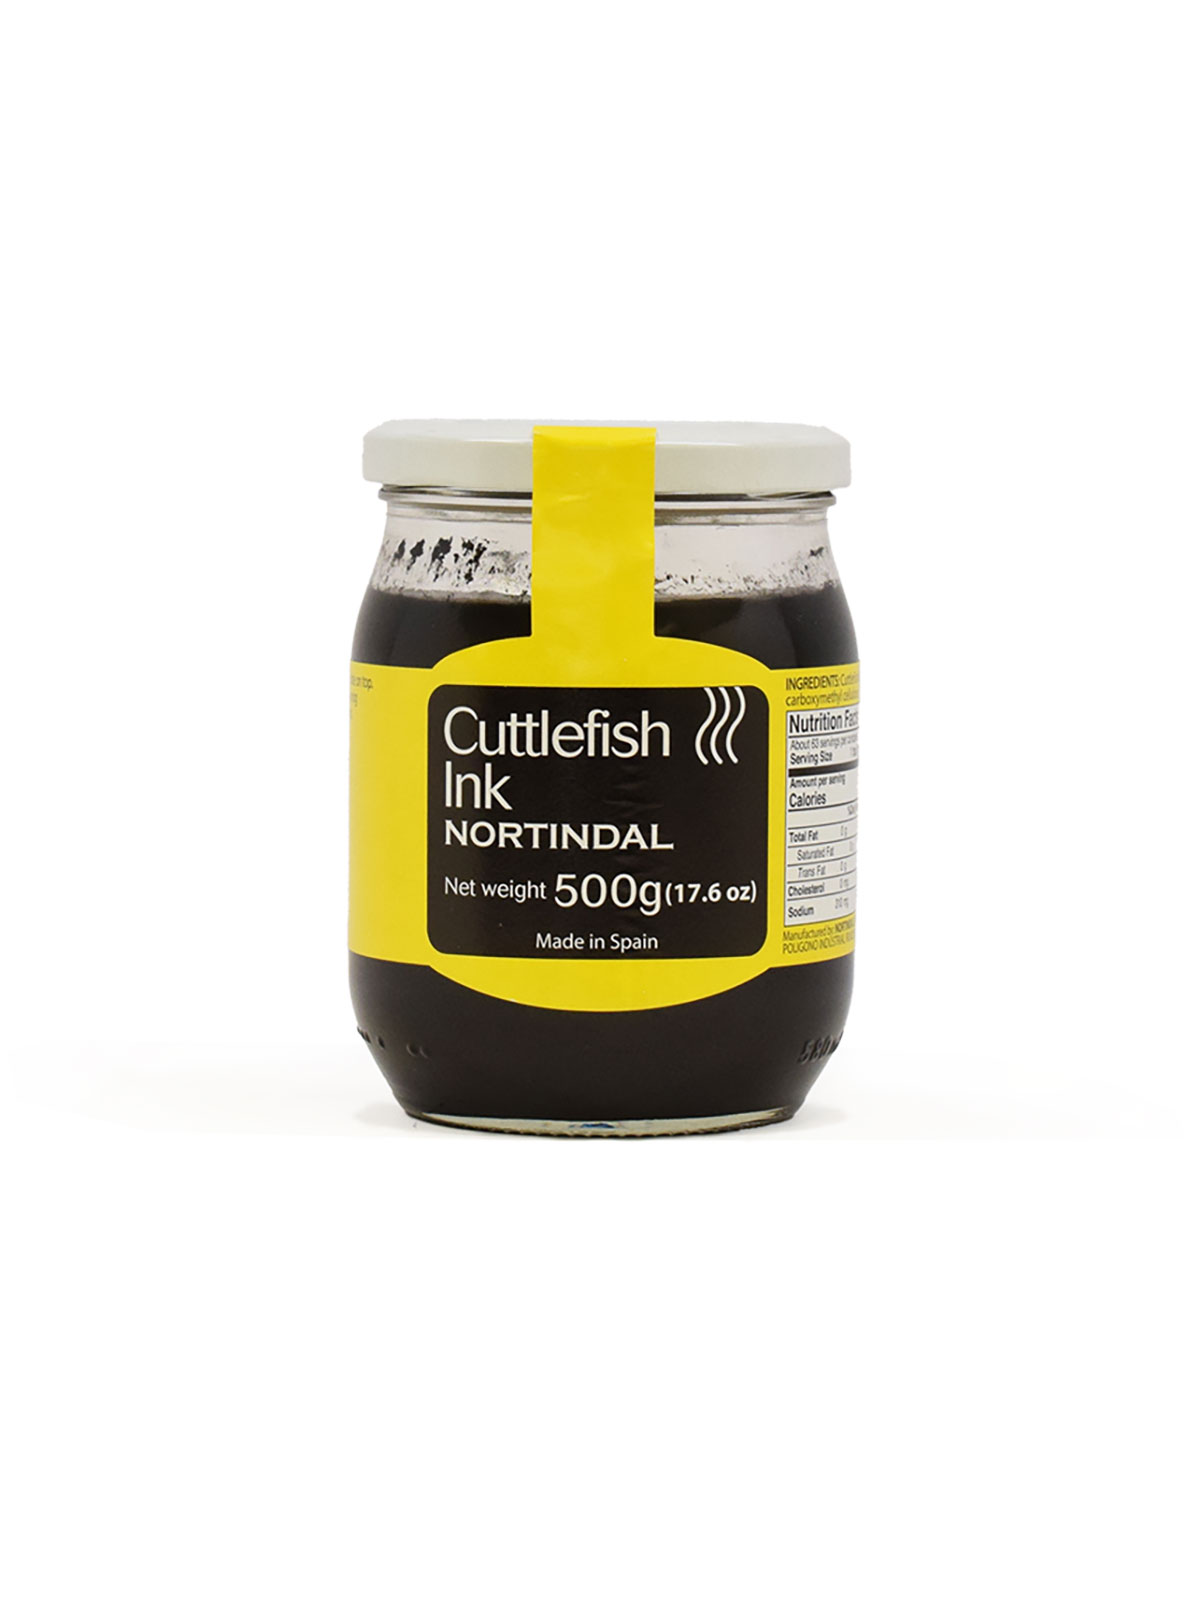 NORTINDAL CUTTLEFISH INK 1.1 lbs.